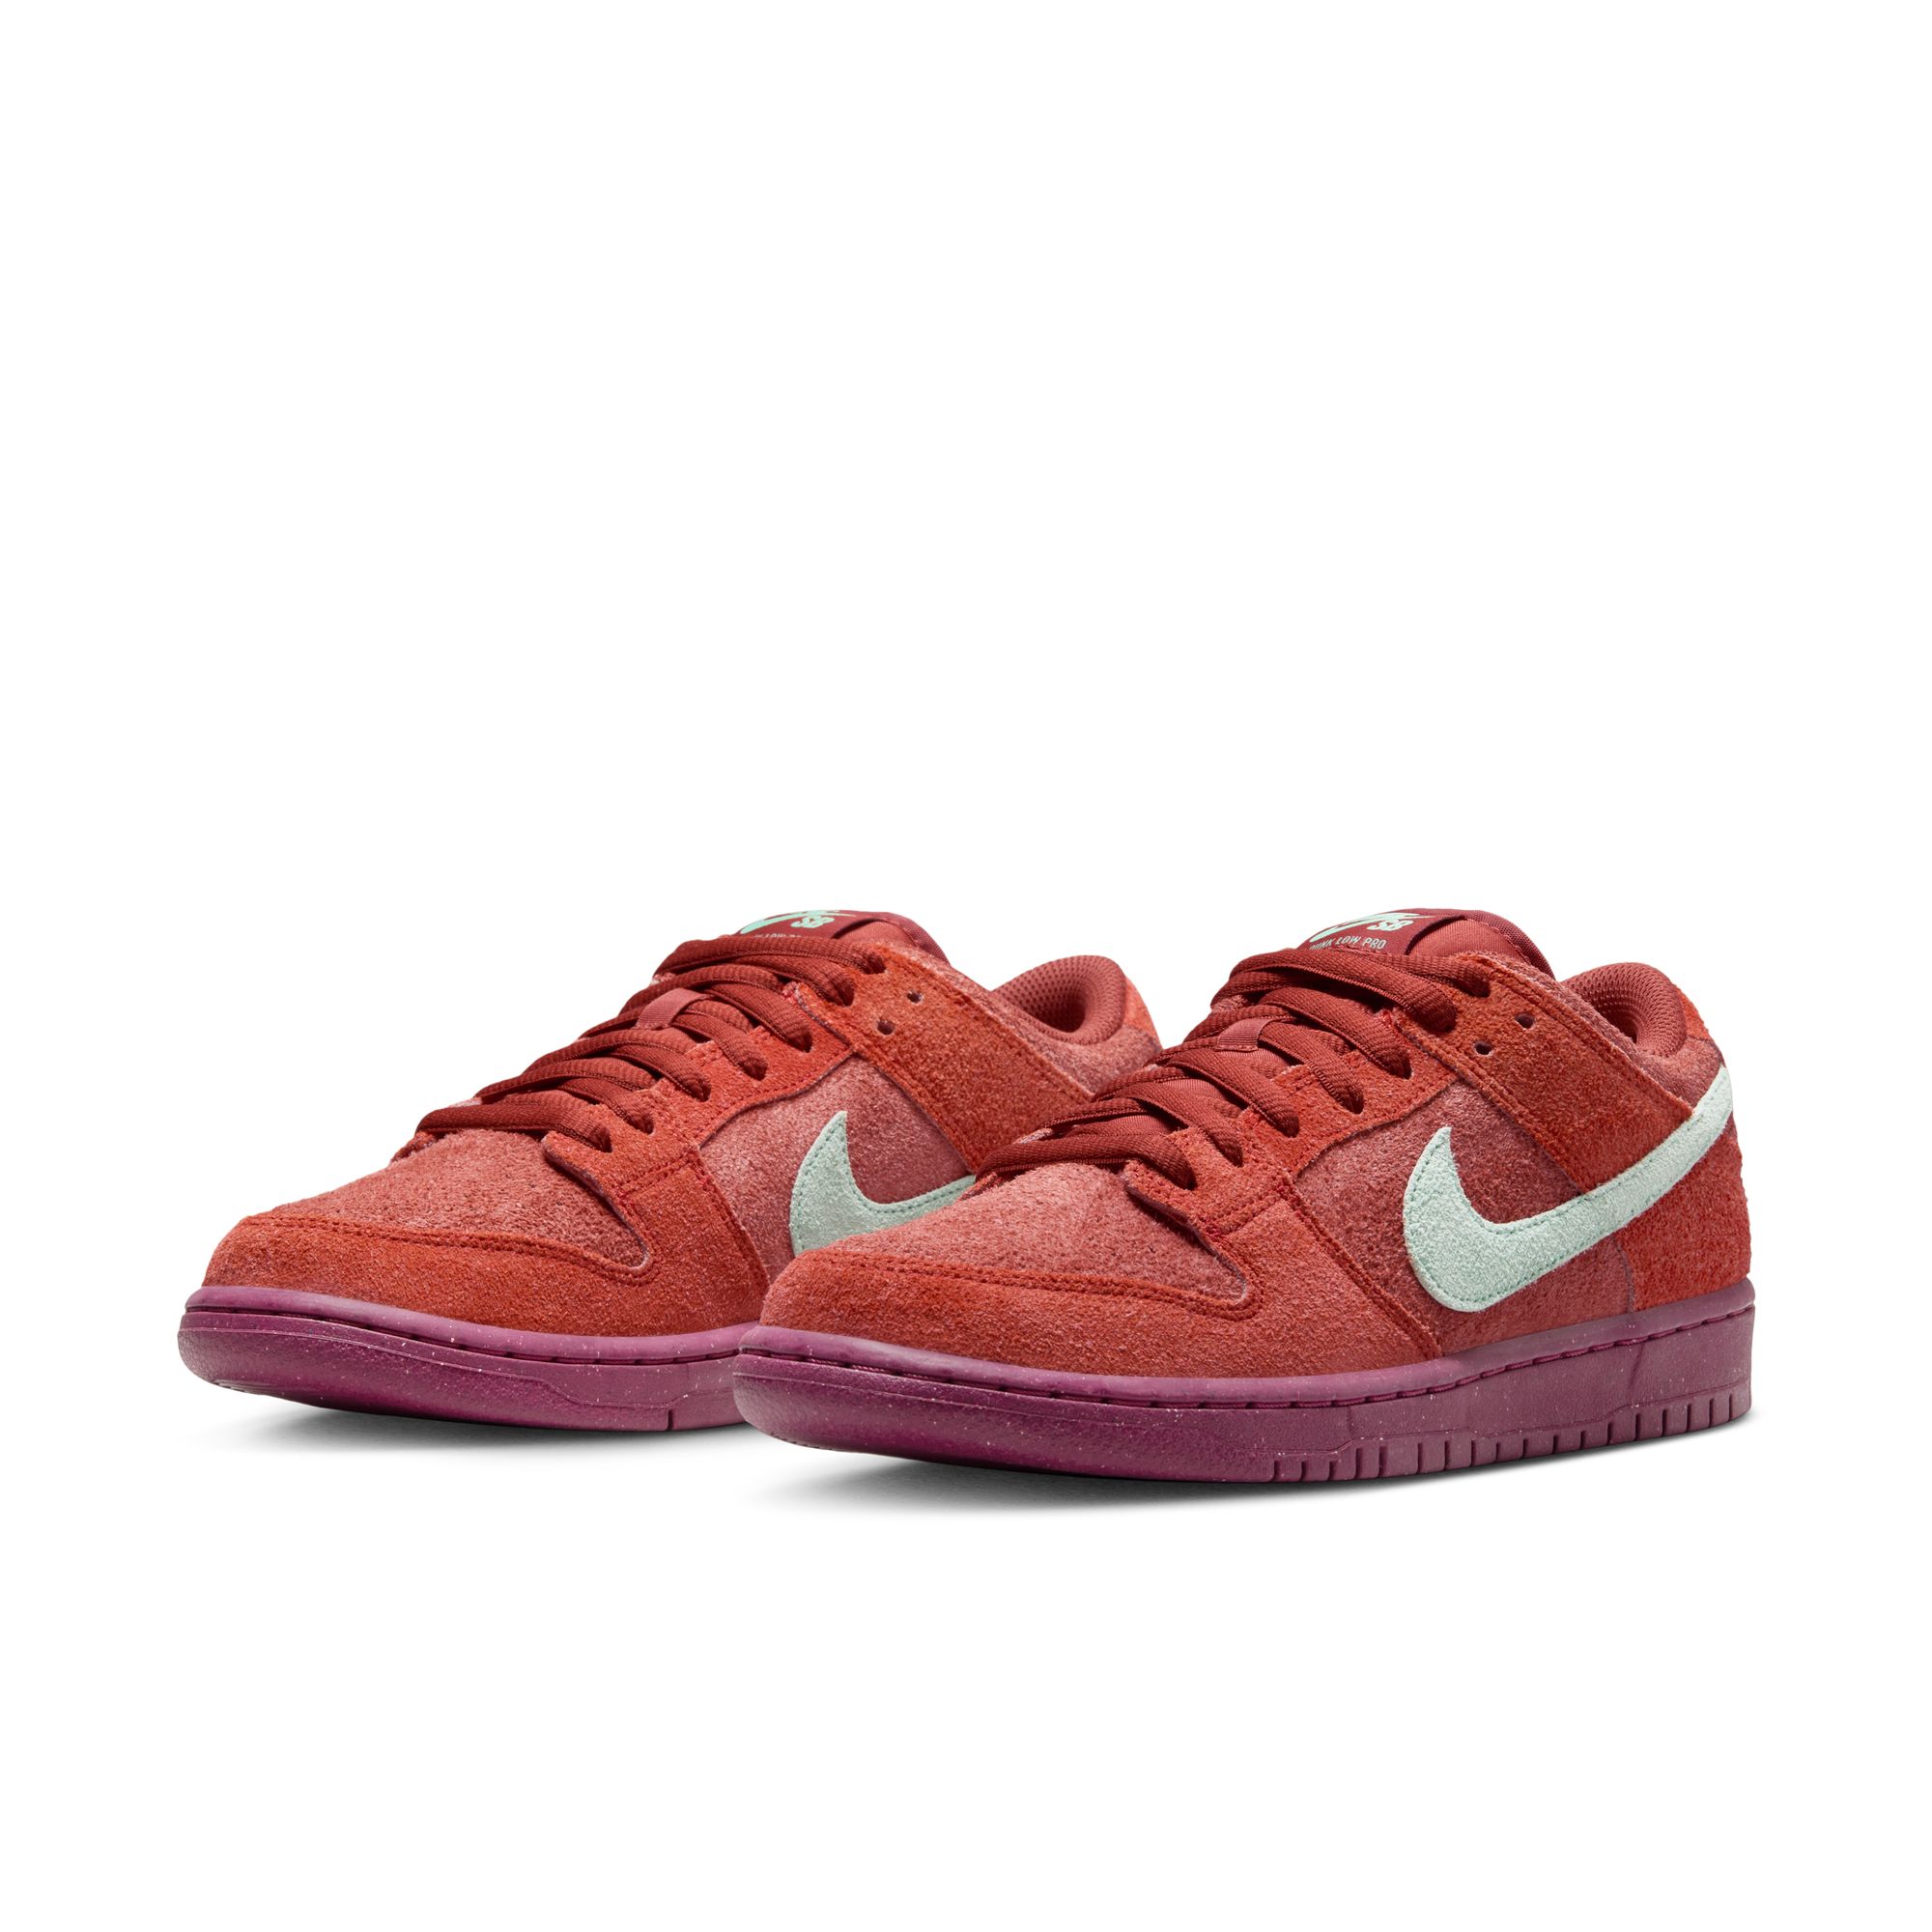 Nike SB Dunk Low Mystic Red and Rosewood｜ANCHOR SKATE SHOP